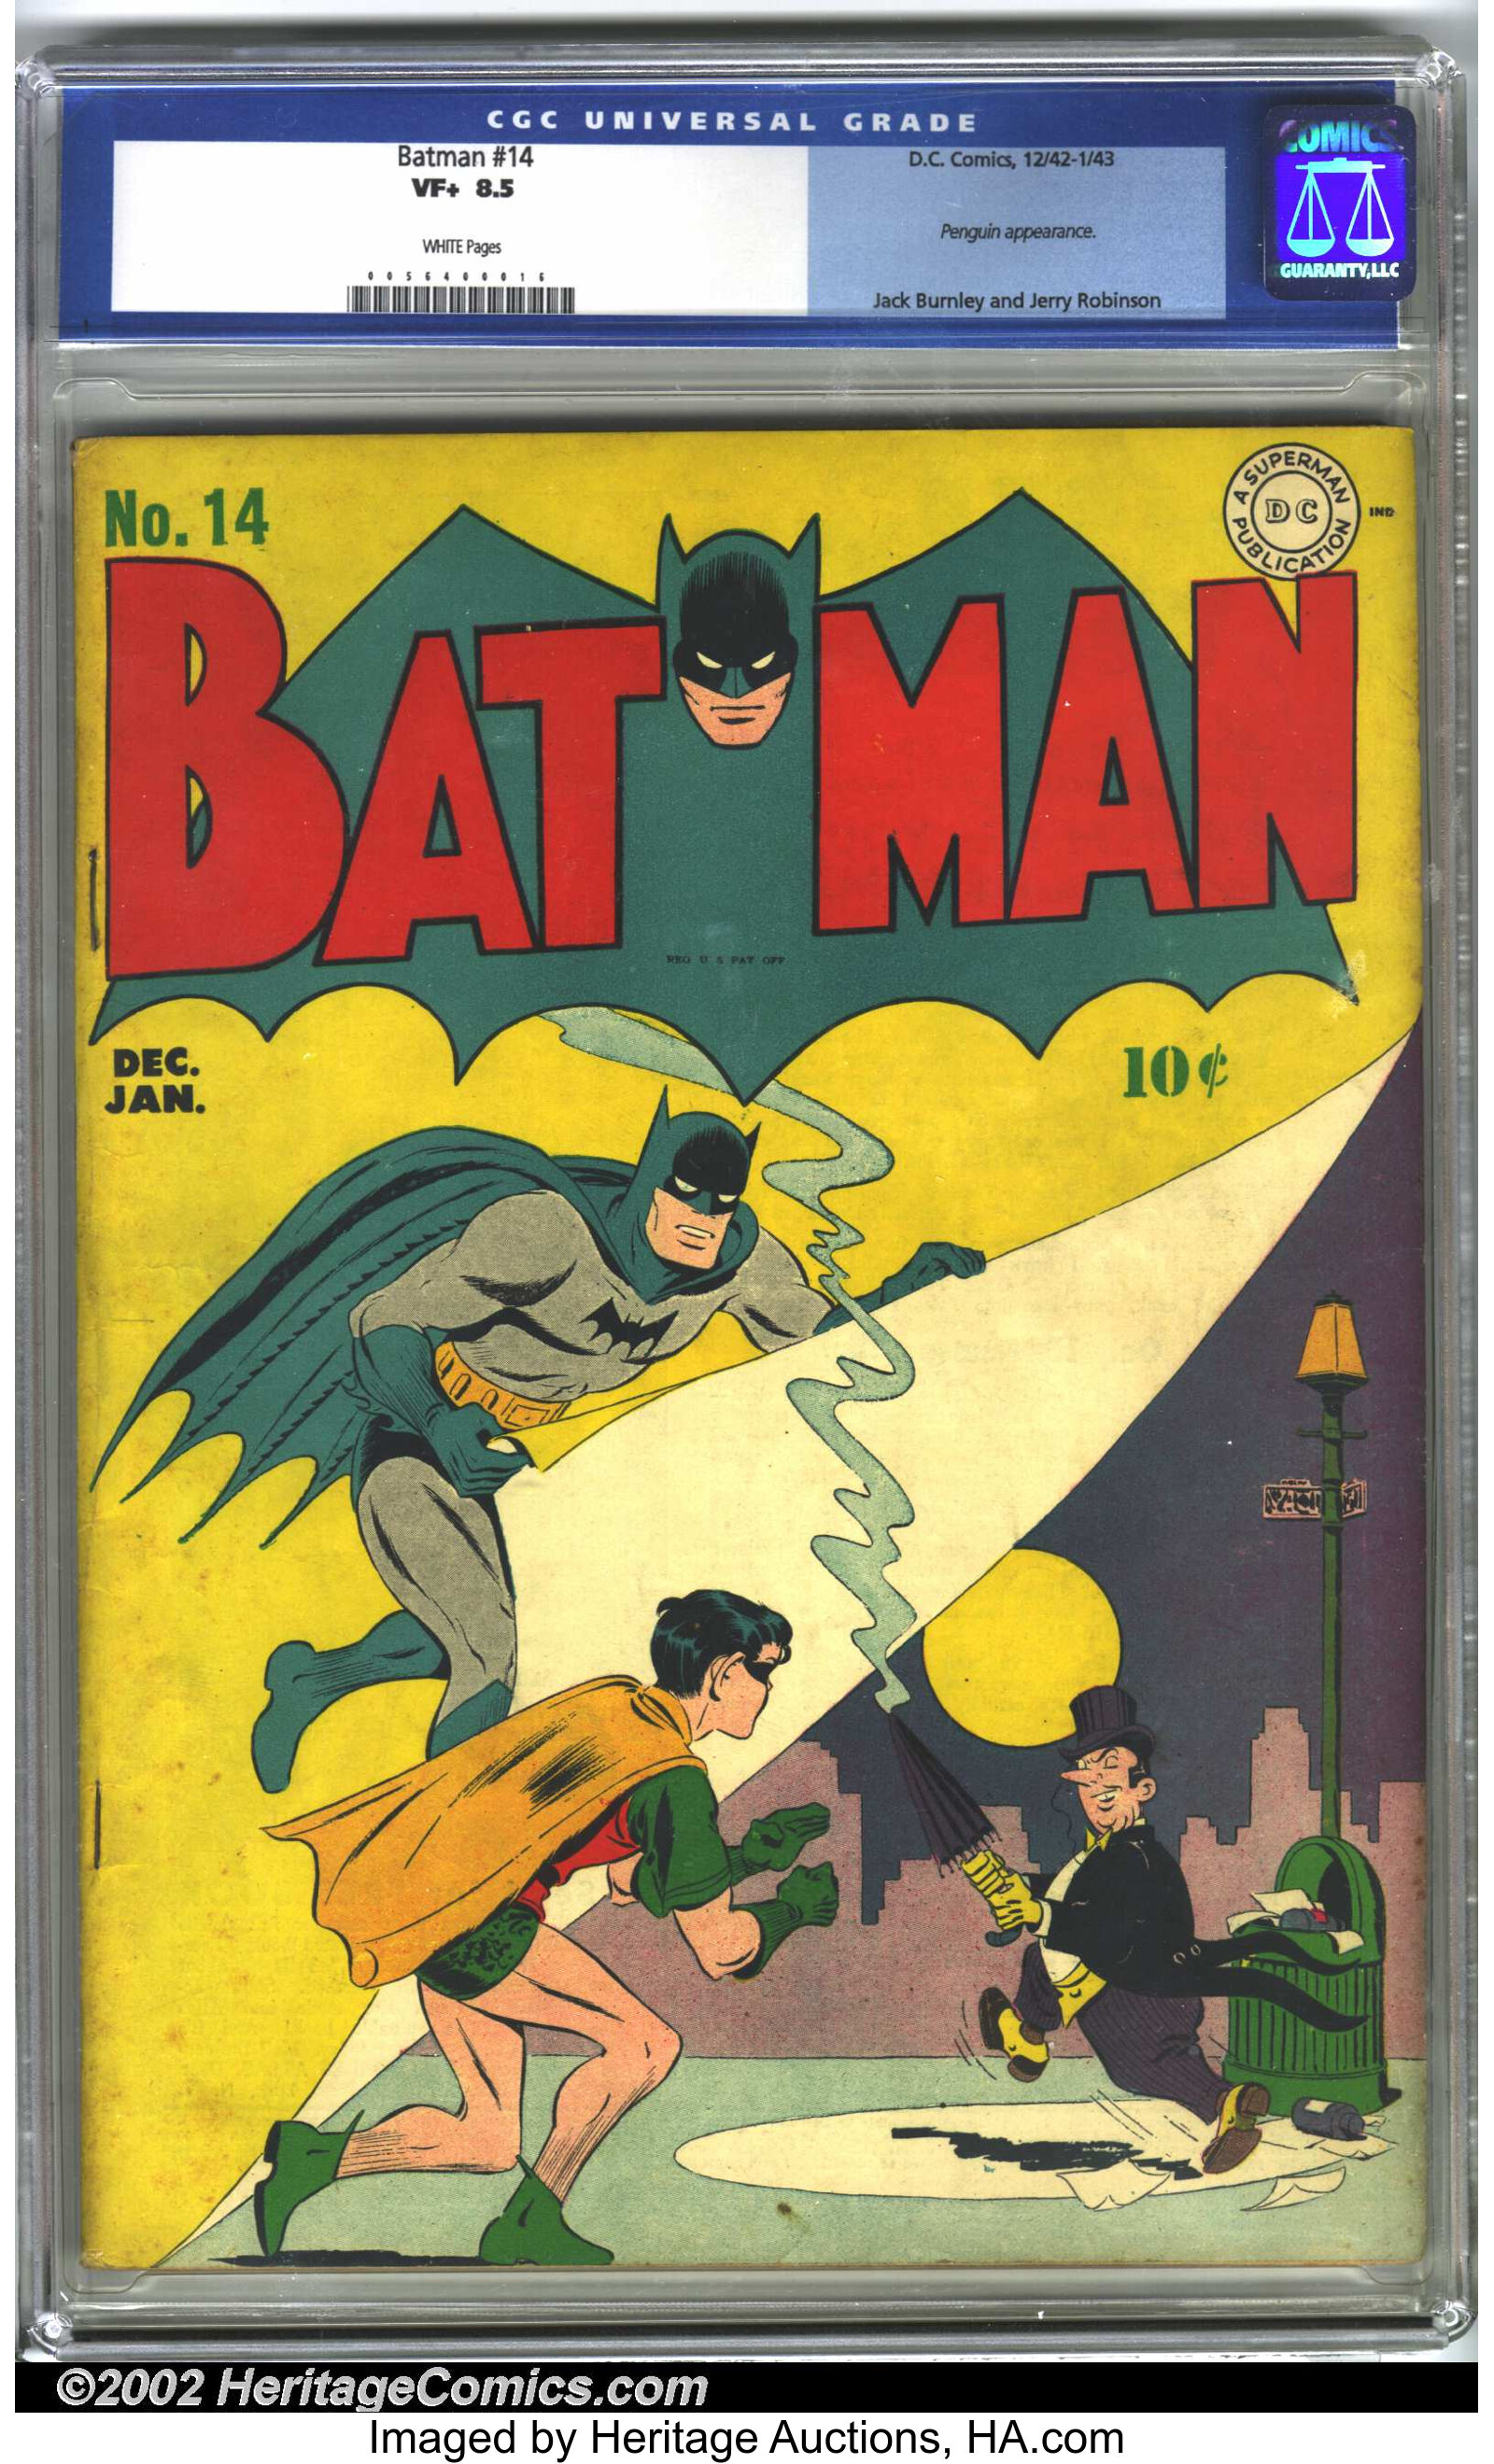 Batman #14 (DC, 1943) CGC VF+  White pages. Batman and Robin look | Lot  #5417 | Heritage Auctions